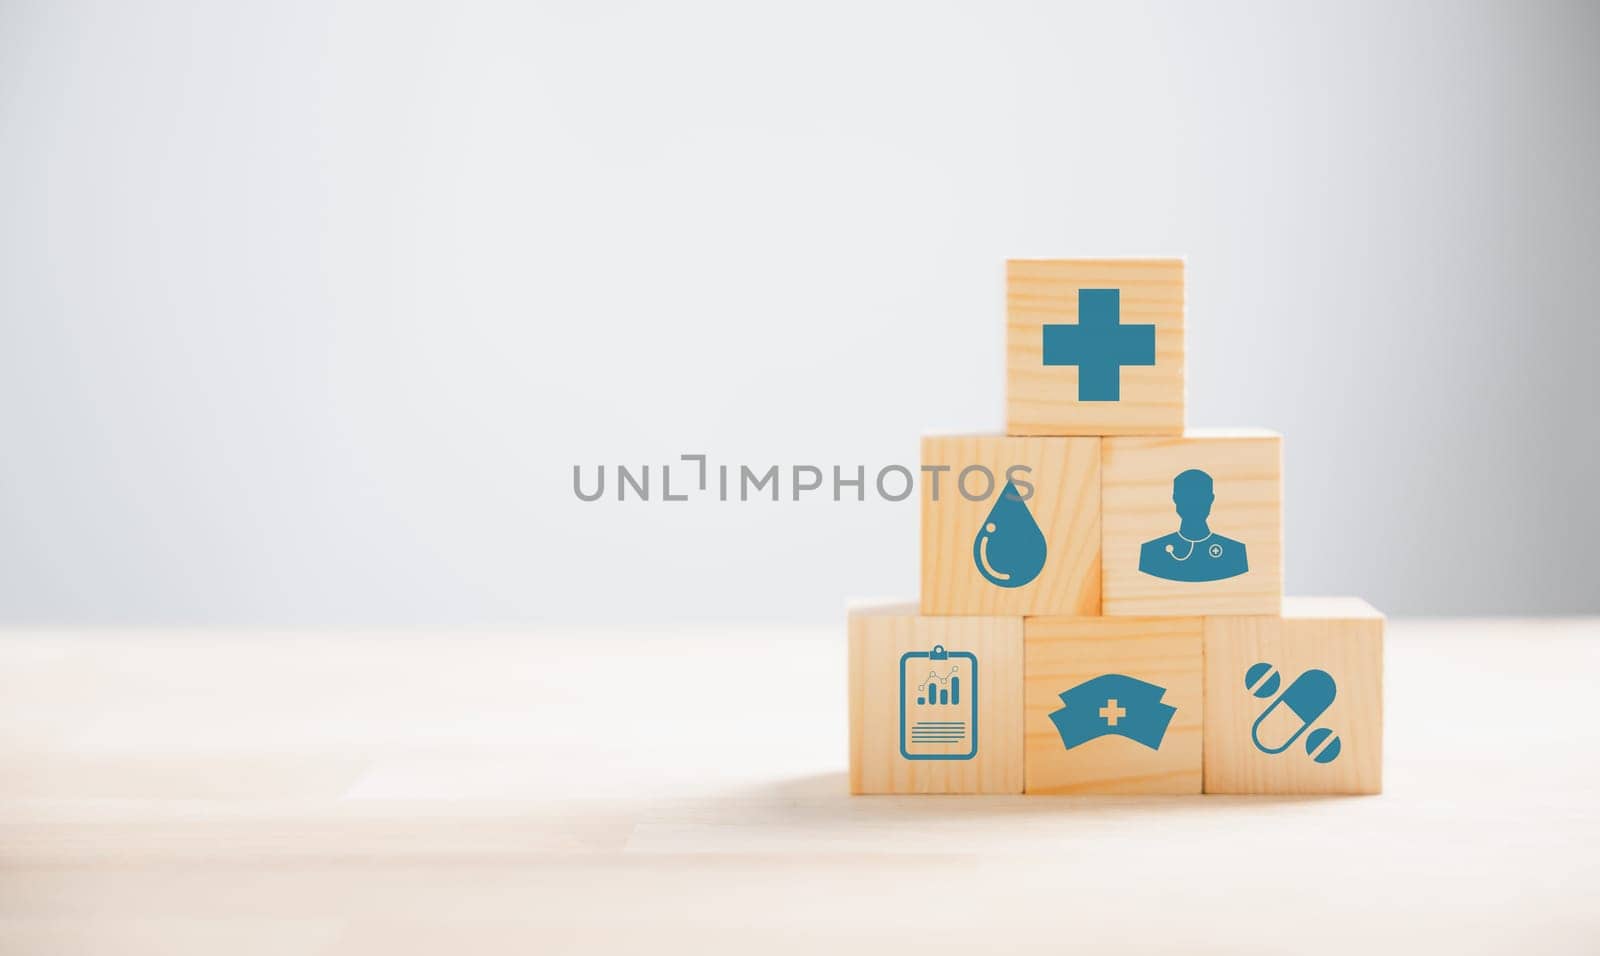 Pyramid wooden cubes, forming stack represents healthcare insurance concept. Medical icons atop, conveying protection and security. background provides copyspace for conveying Health Insurance ideas.